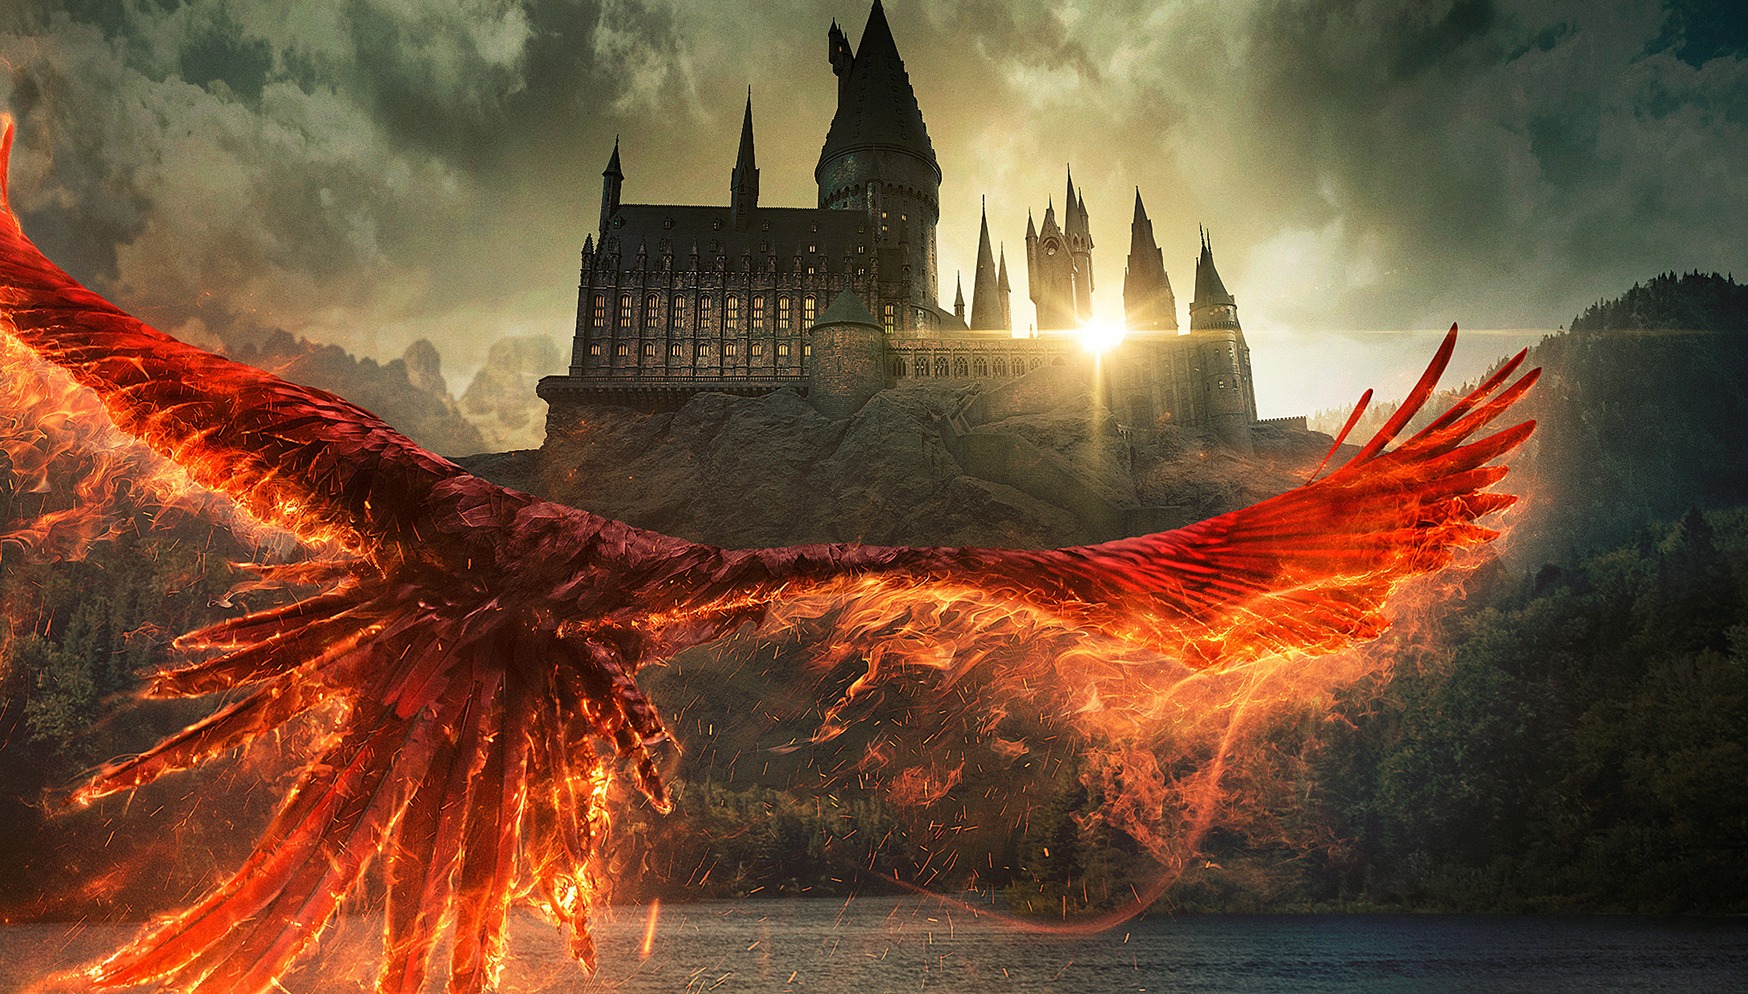 The Complete Wizarding World of Harry Potter Guide and Two-Day